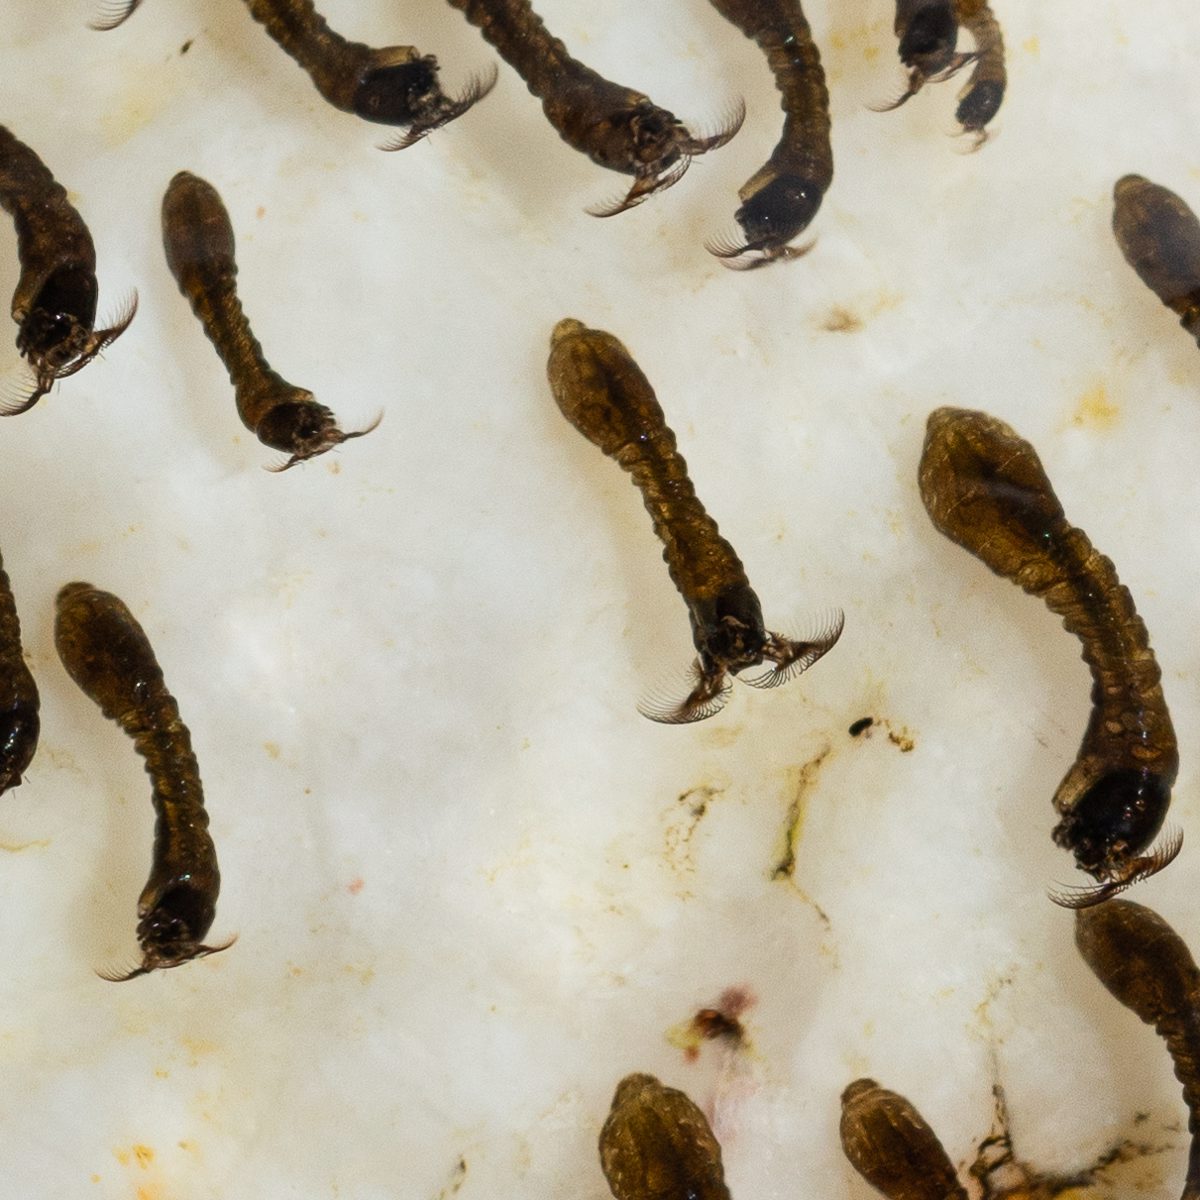 Blackfly Larvae cling to white rock filtering for food under clear water.